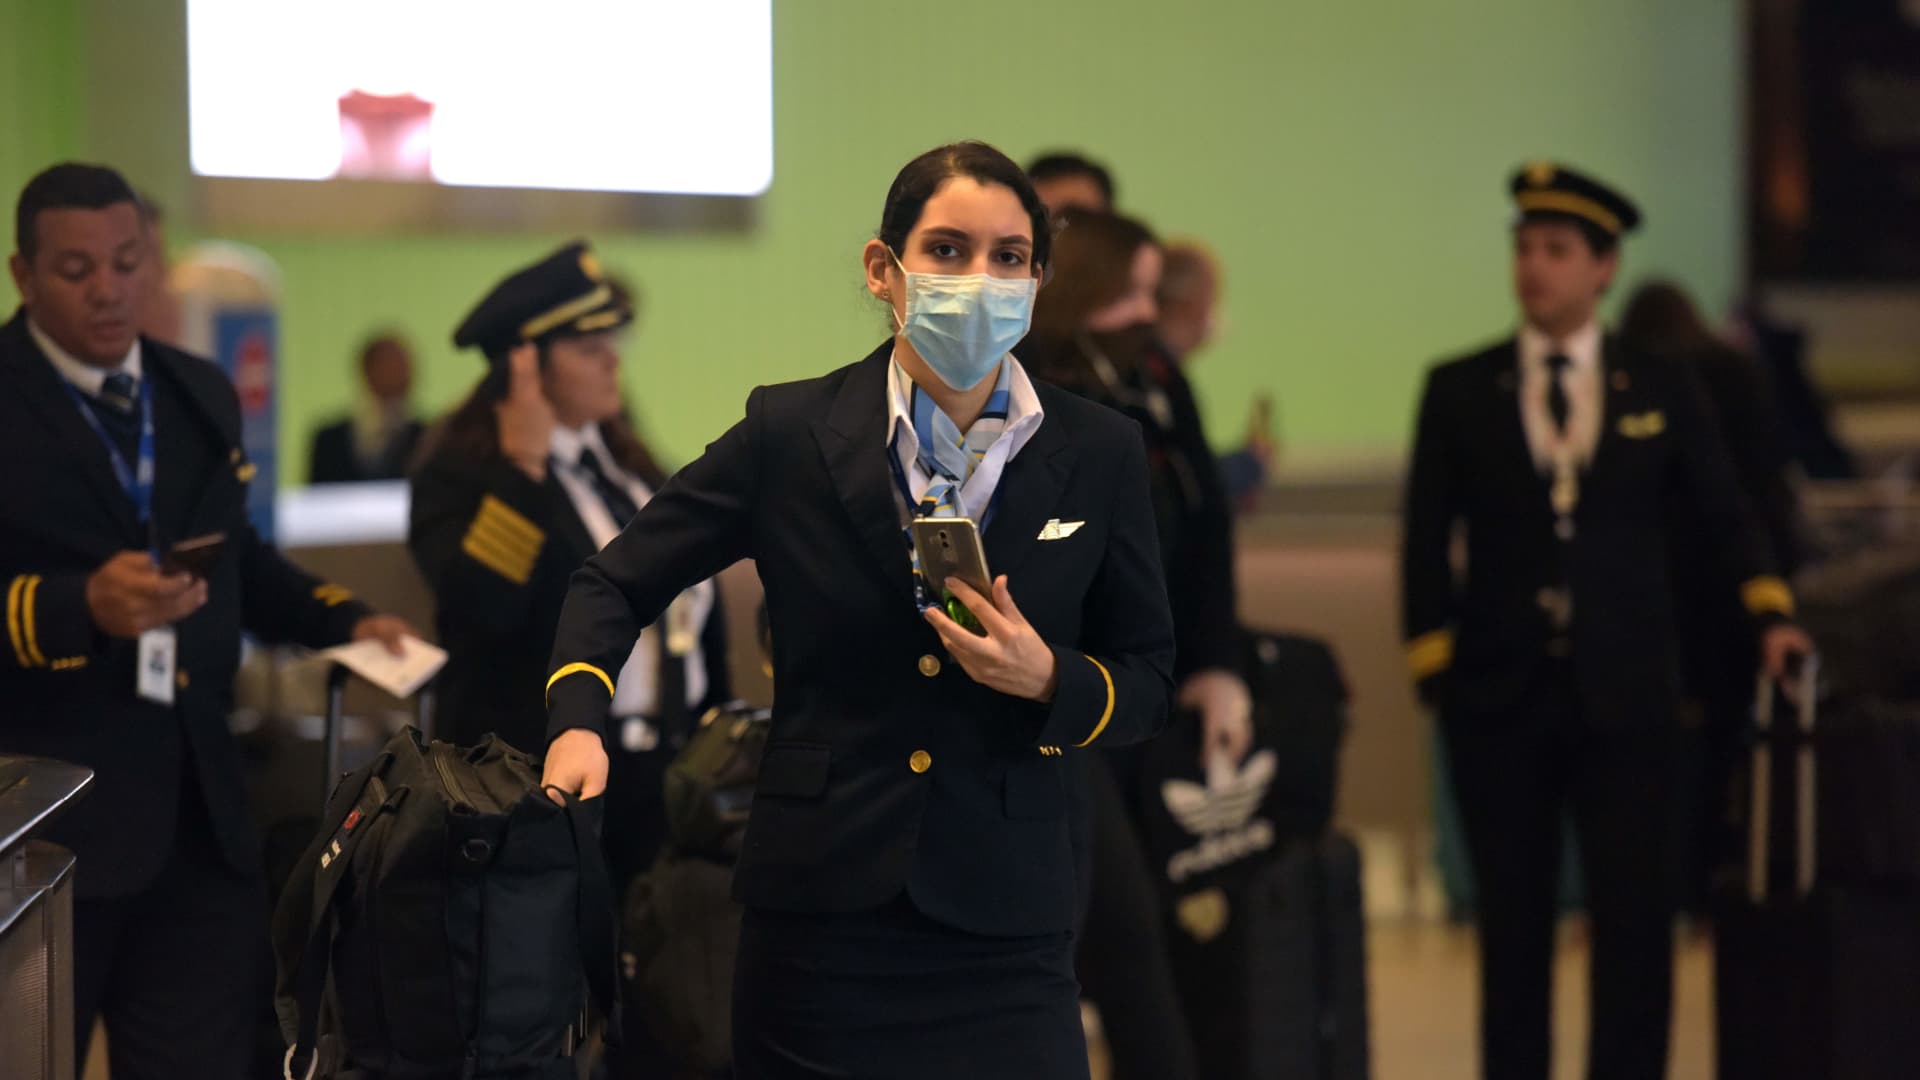 A flight attendant arrives at Tom Bradley Terminal at Los Angeles International airport in Los Angeles, California on March 16, 2020.